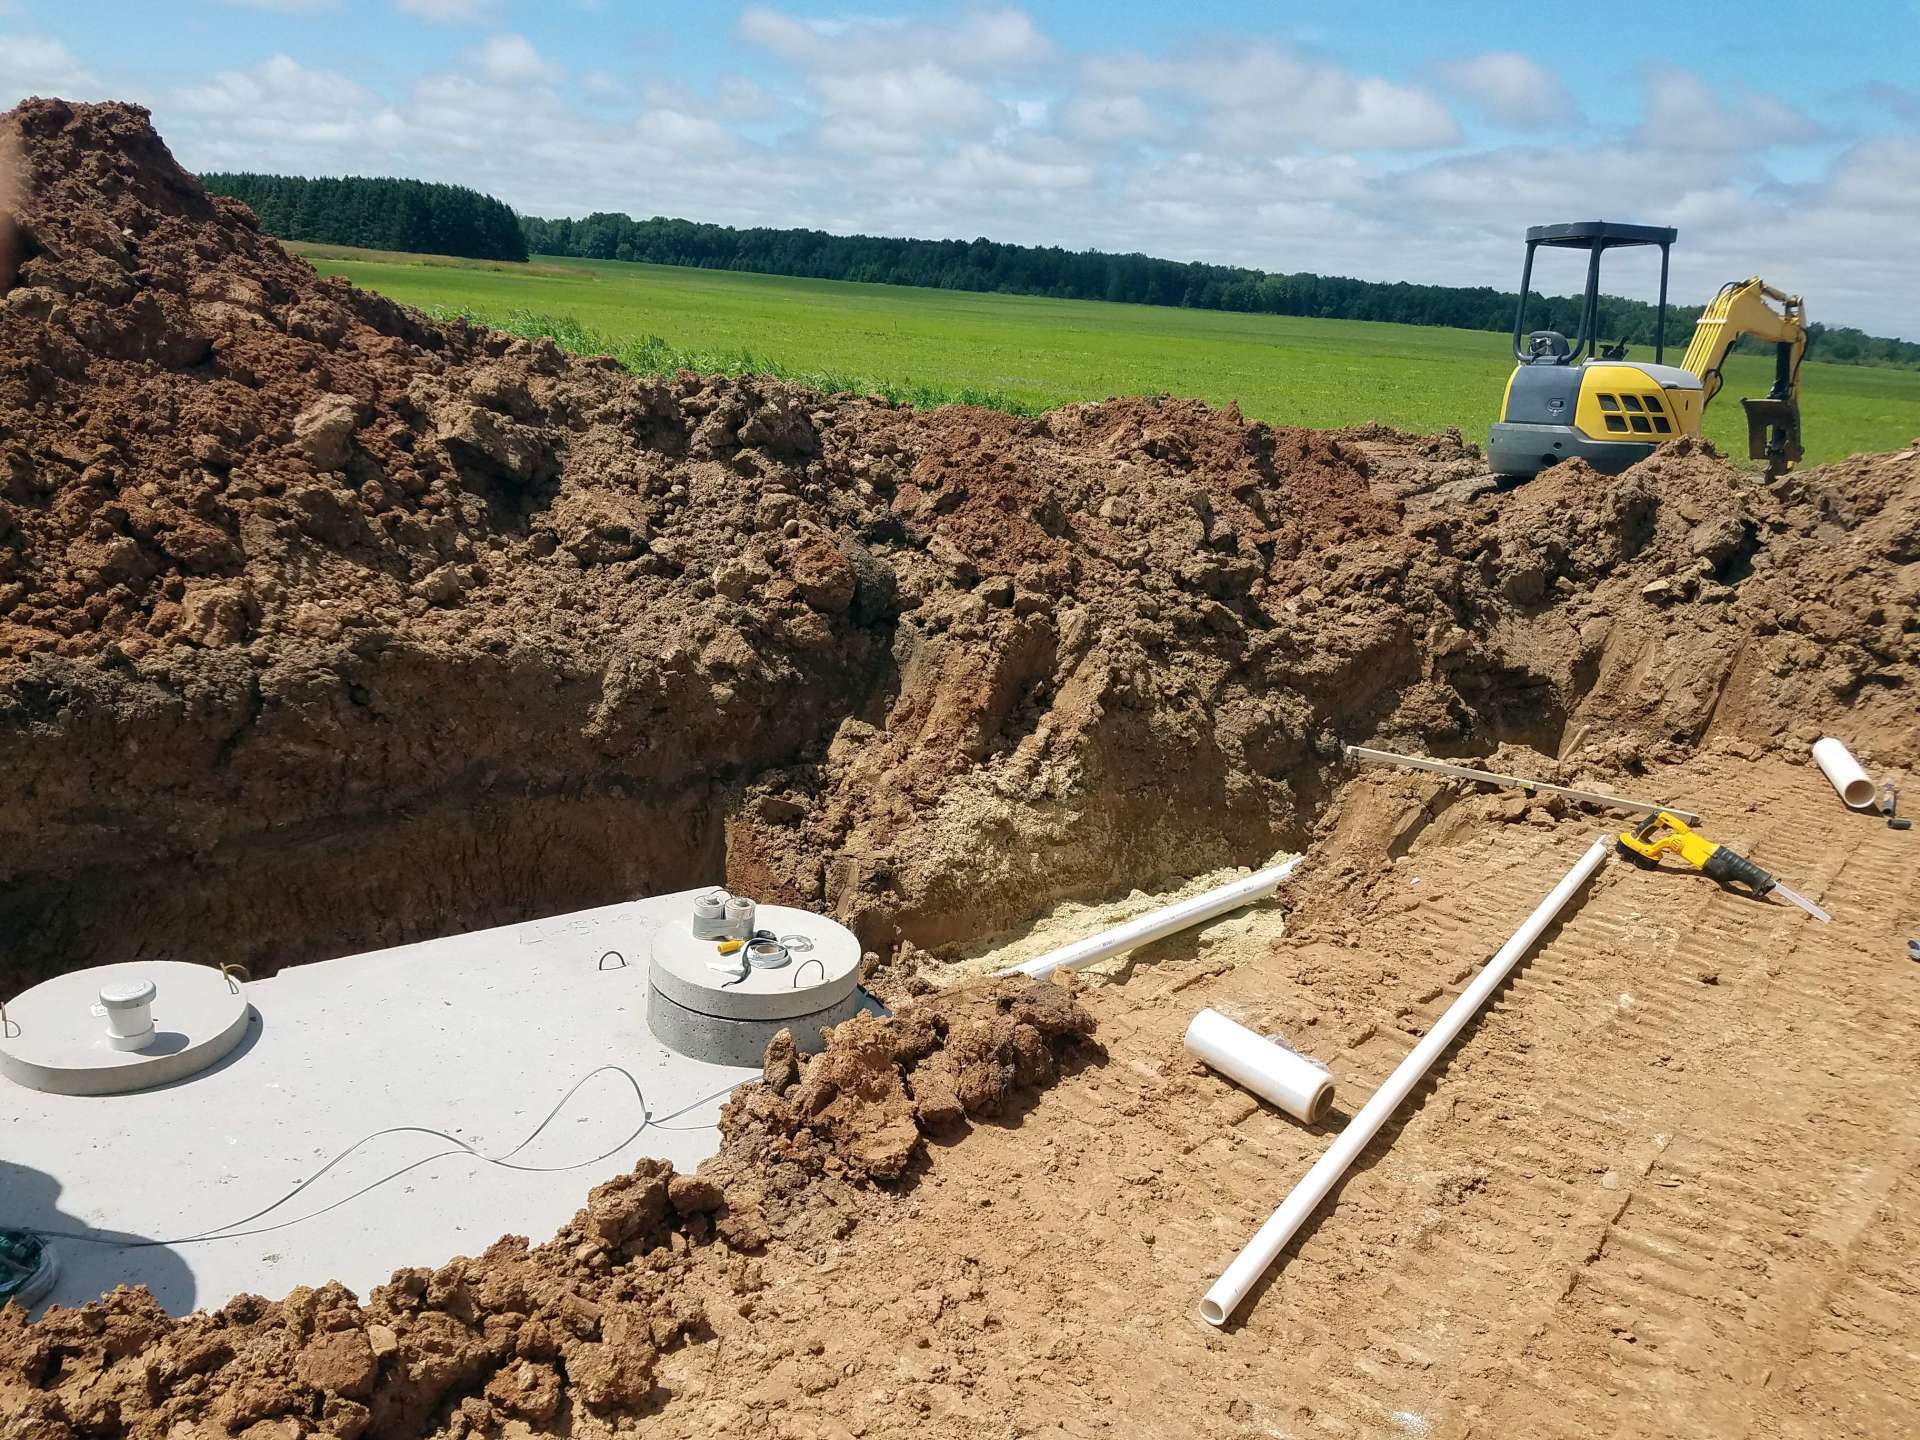 Septic tank being installed in a hole dug by heavy machinery